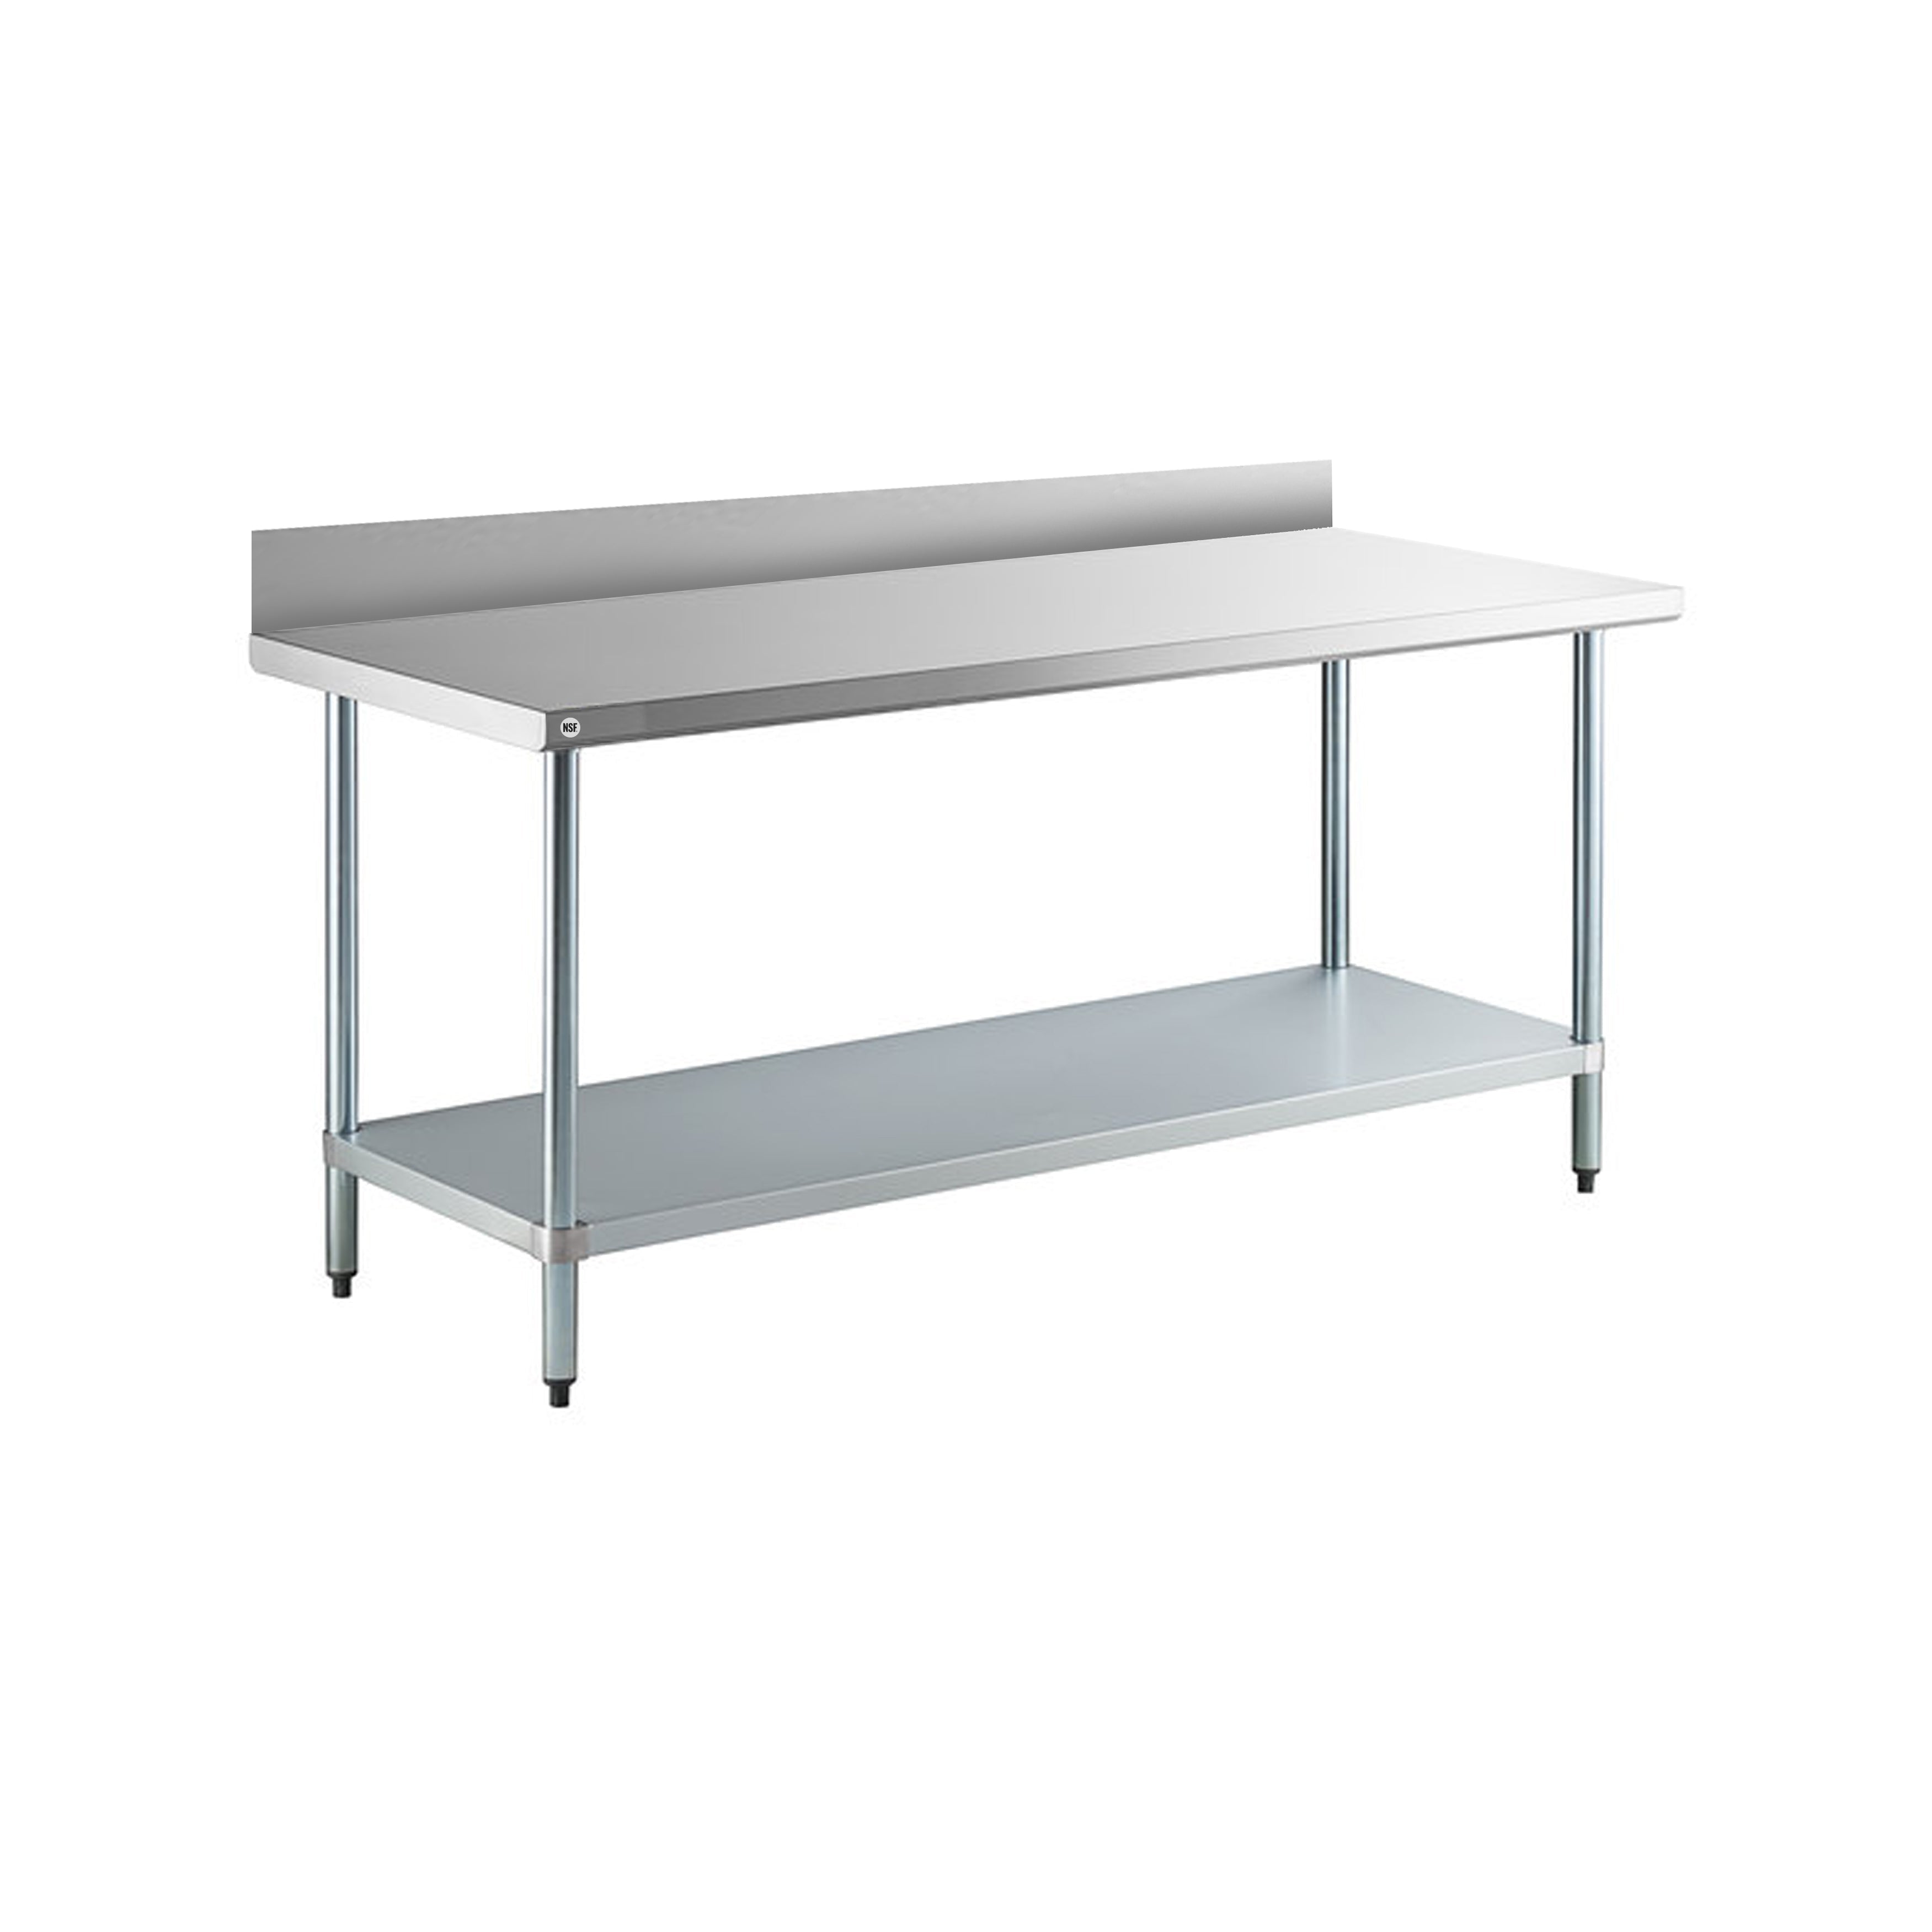 Omcan - 22086, Commercial 30" x 30" Stainless Steel Kitchen Work Table with 4" BackSplash 800lbs Light Duty